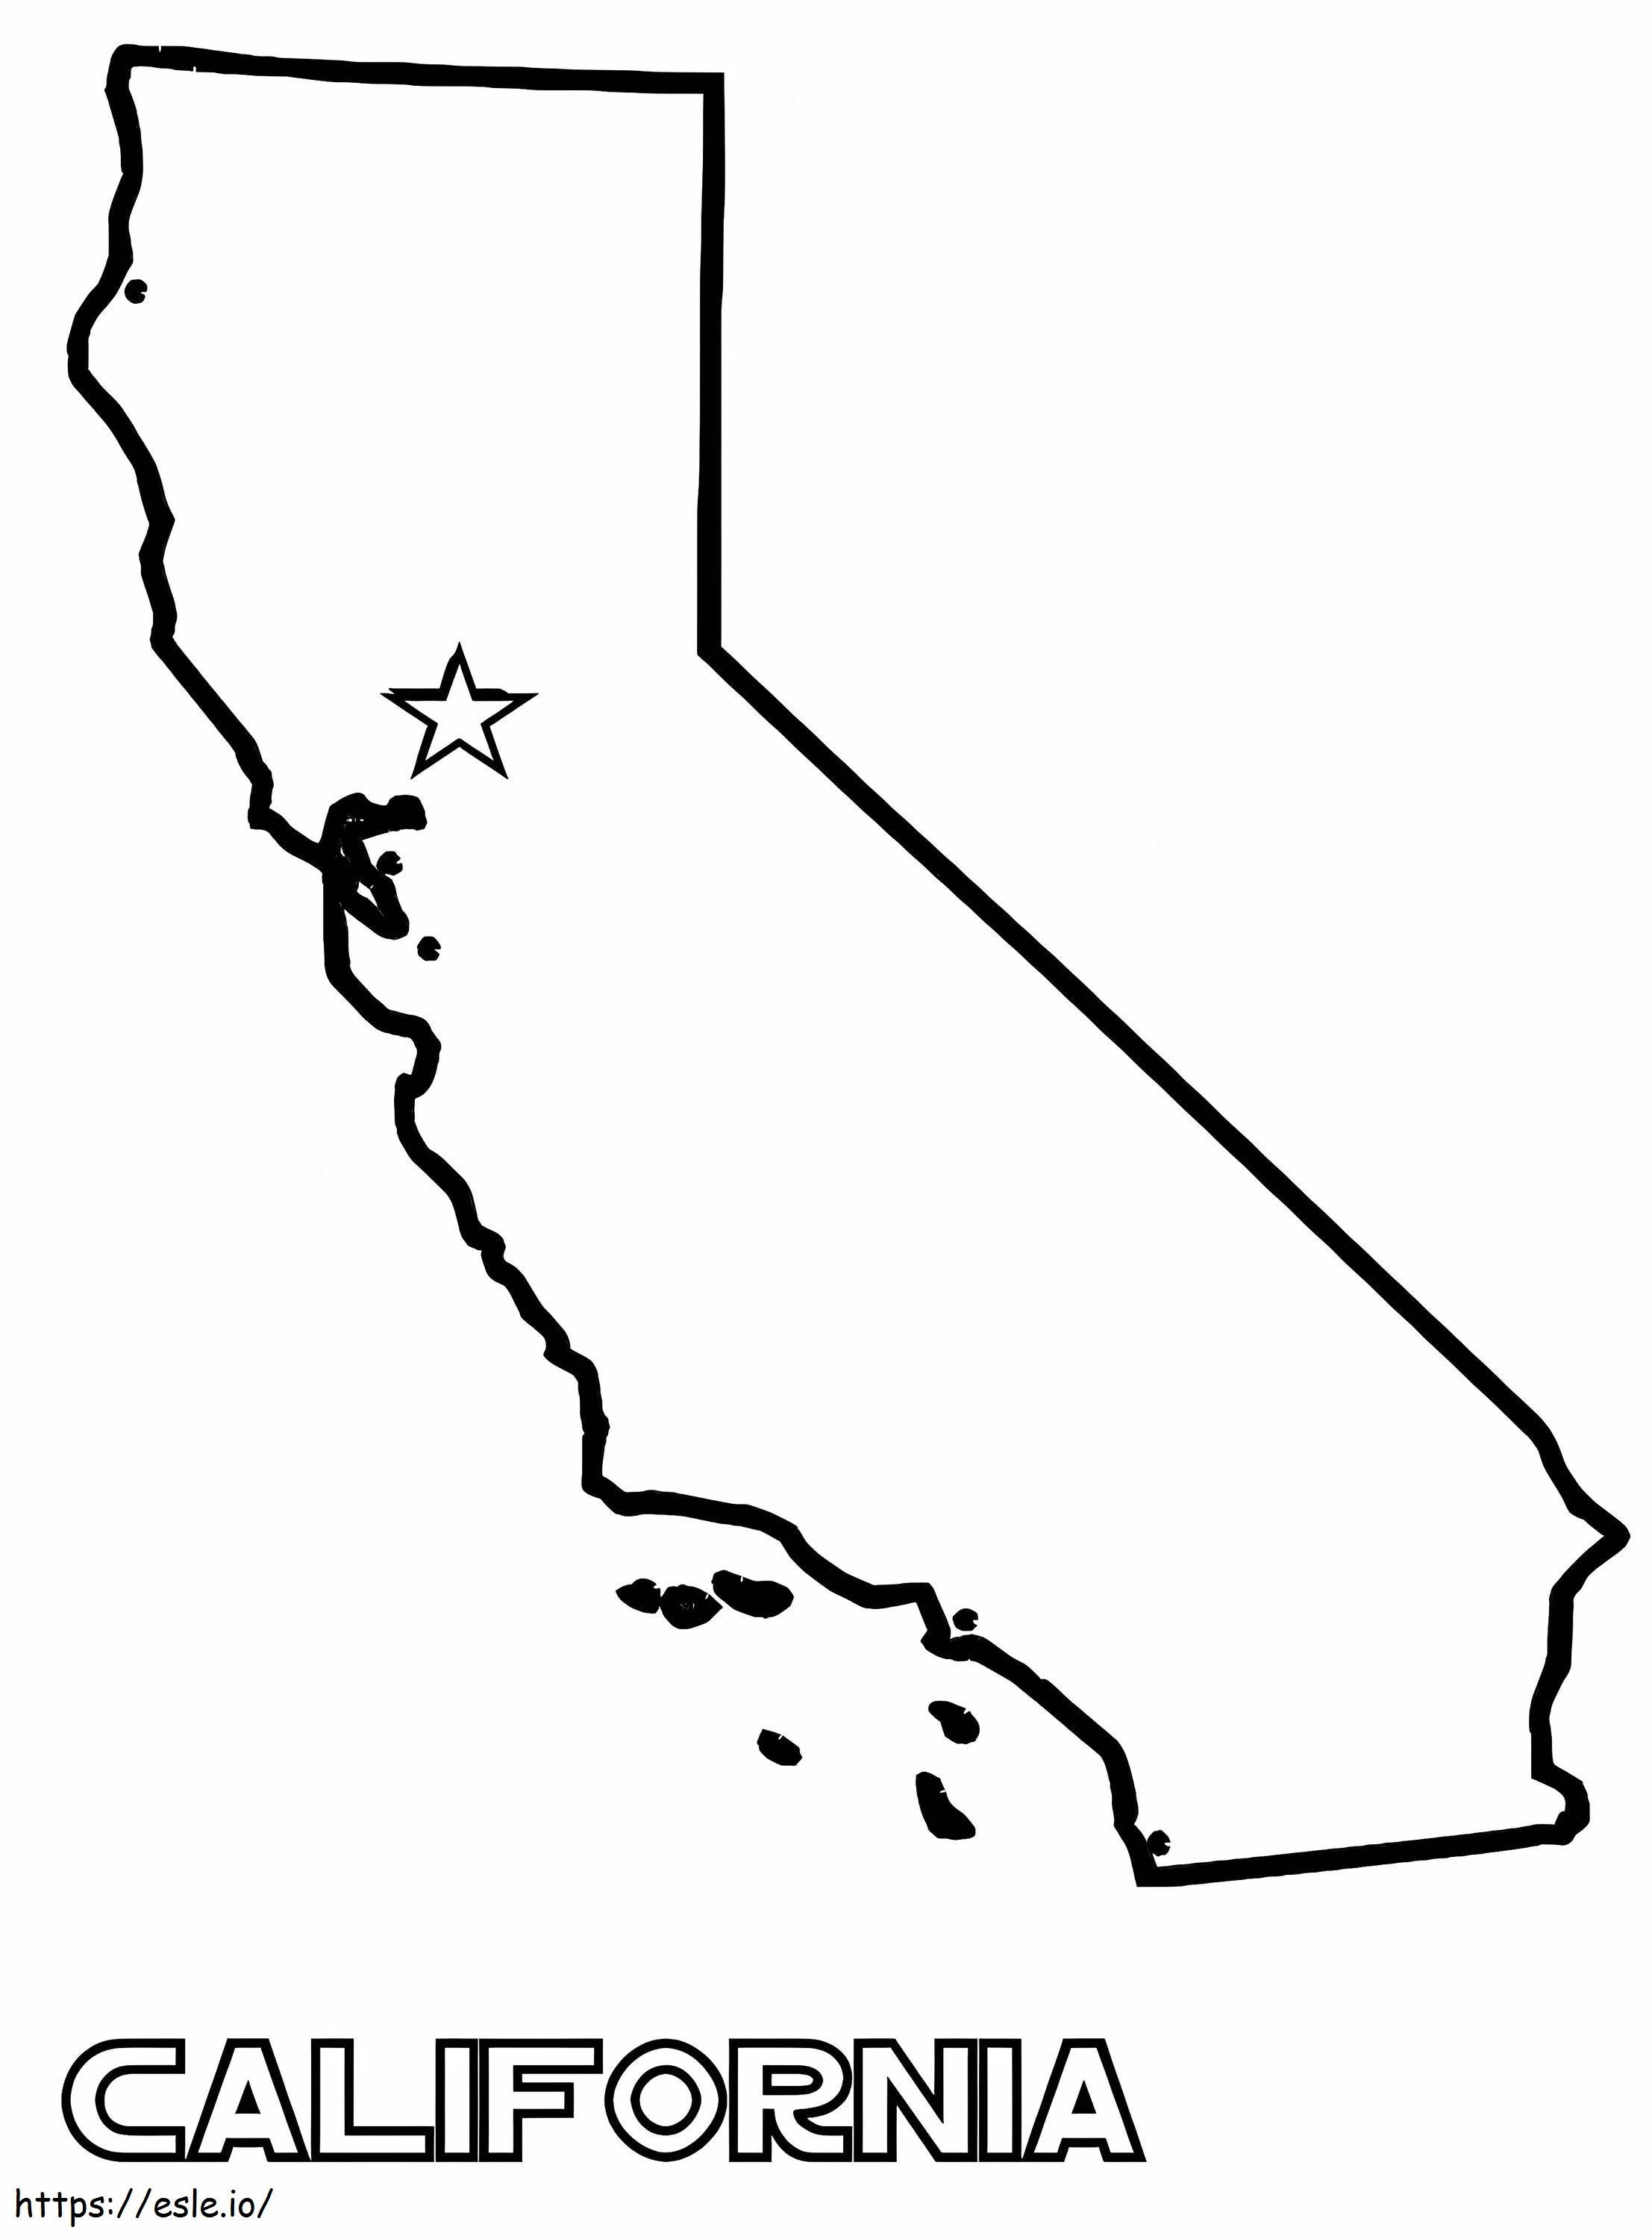 Californias Map coloring page